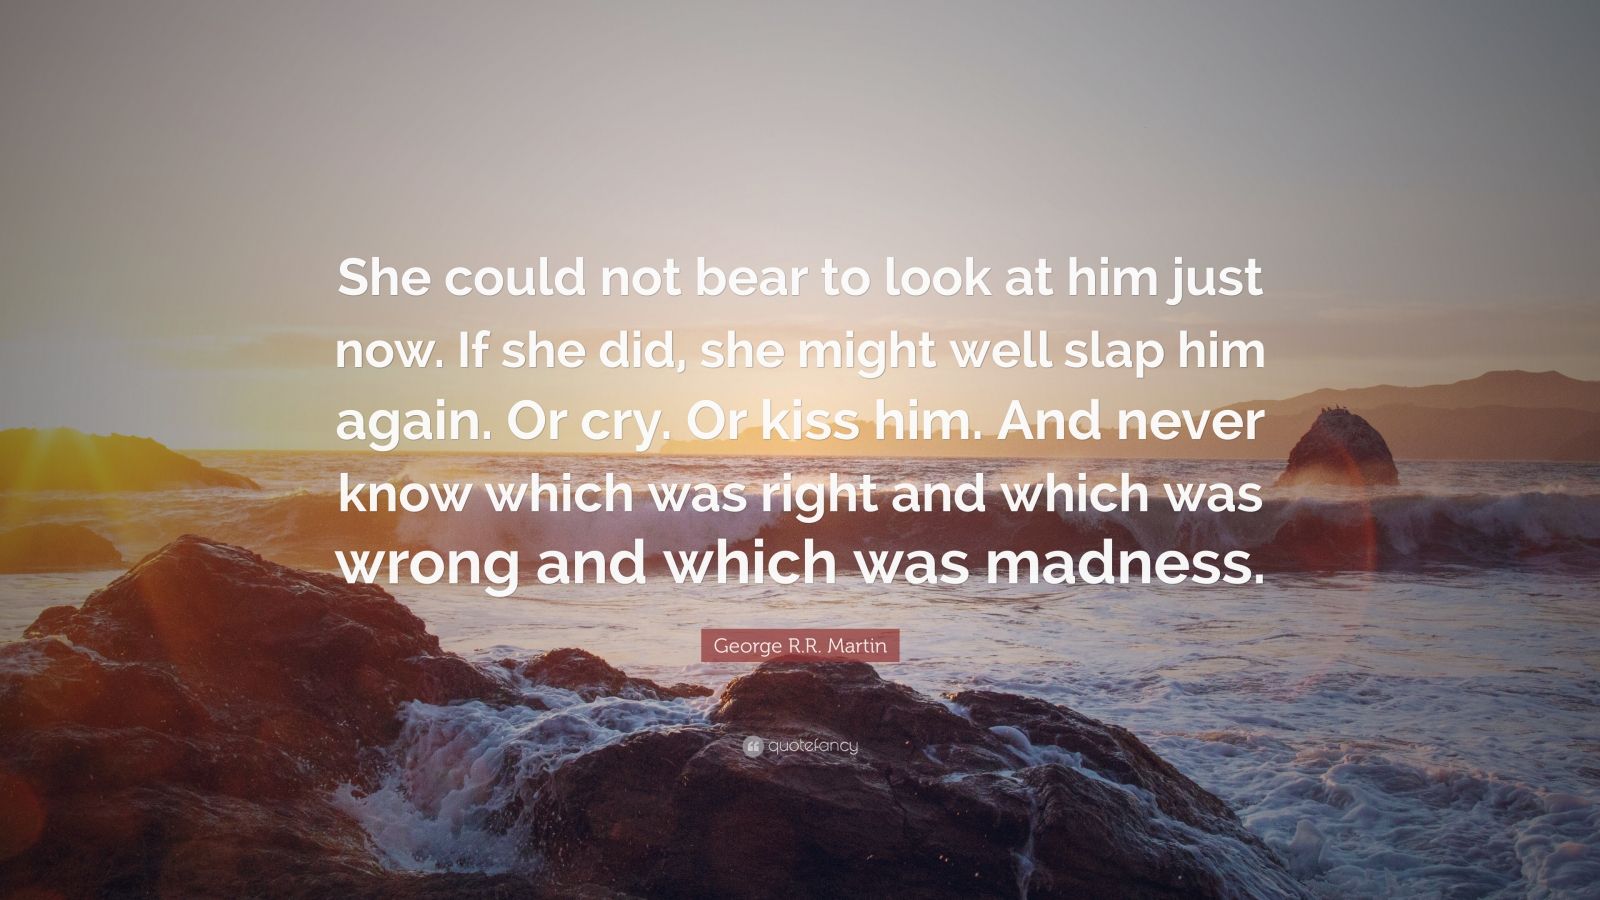 George R.R. Martin Quote: “She could not bear to look at him just now ...